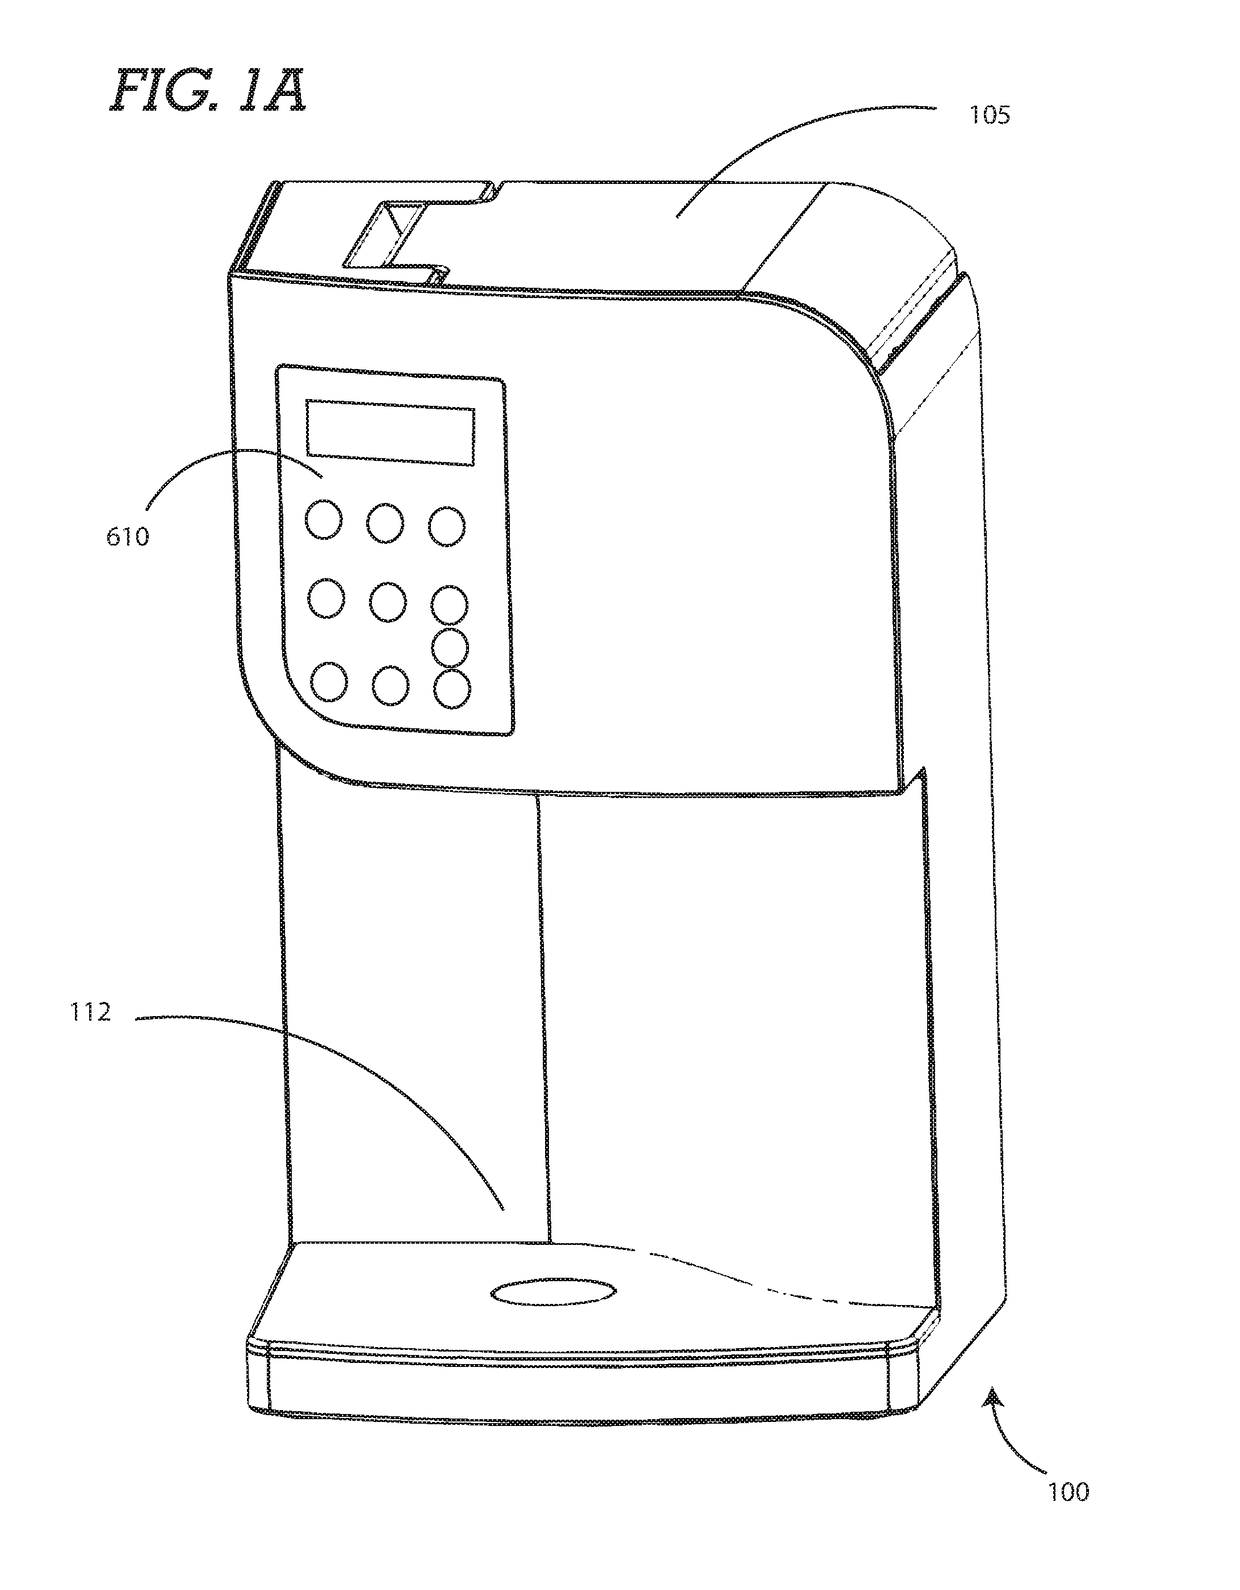 Apparatus for infusing and dispensing oils